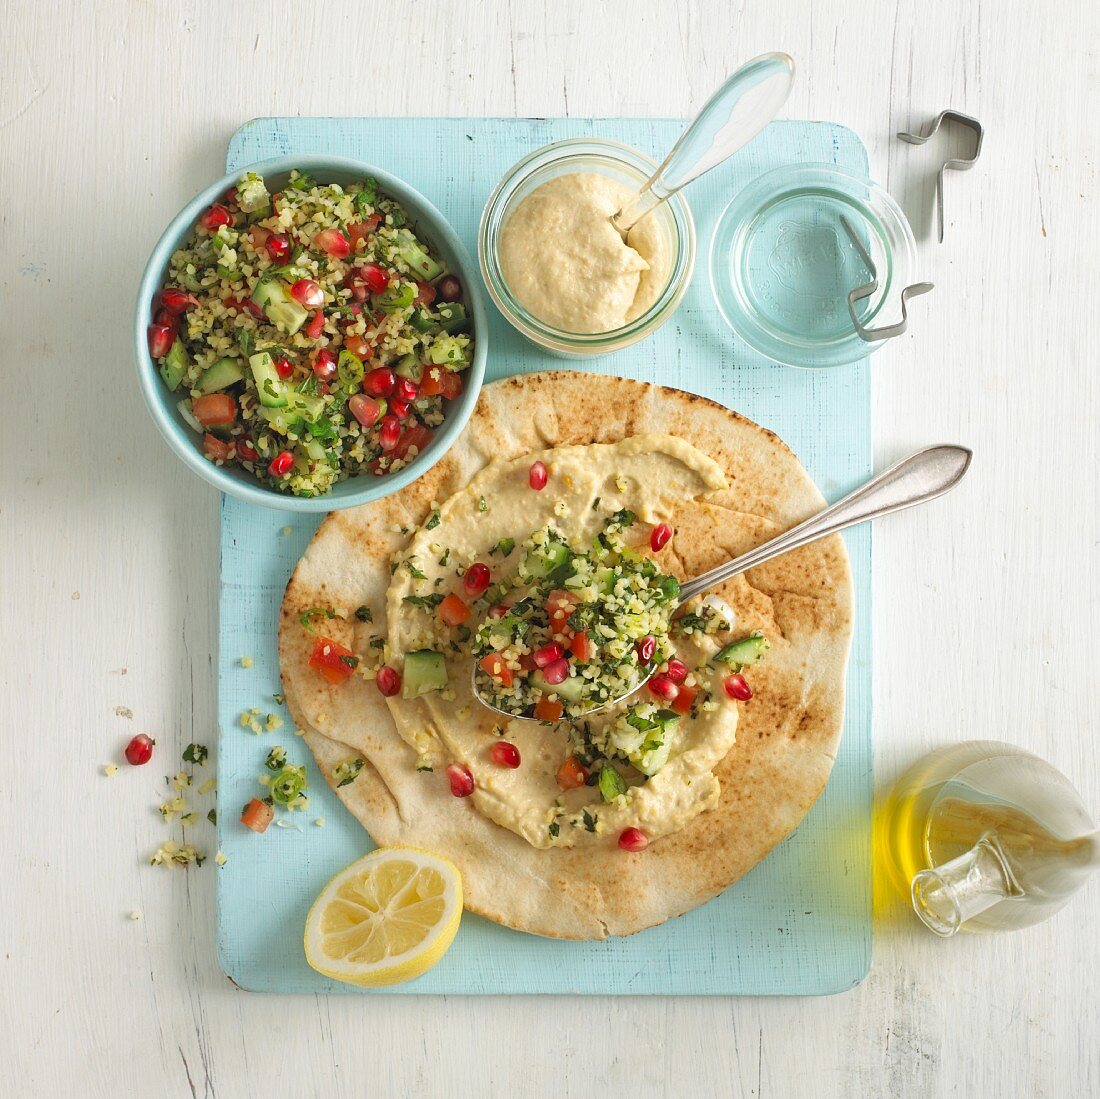 Houmous and tabbouleh on flatbread